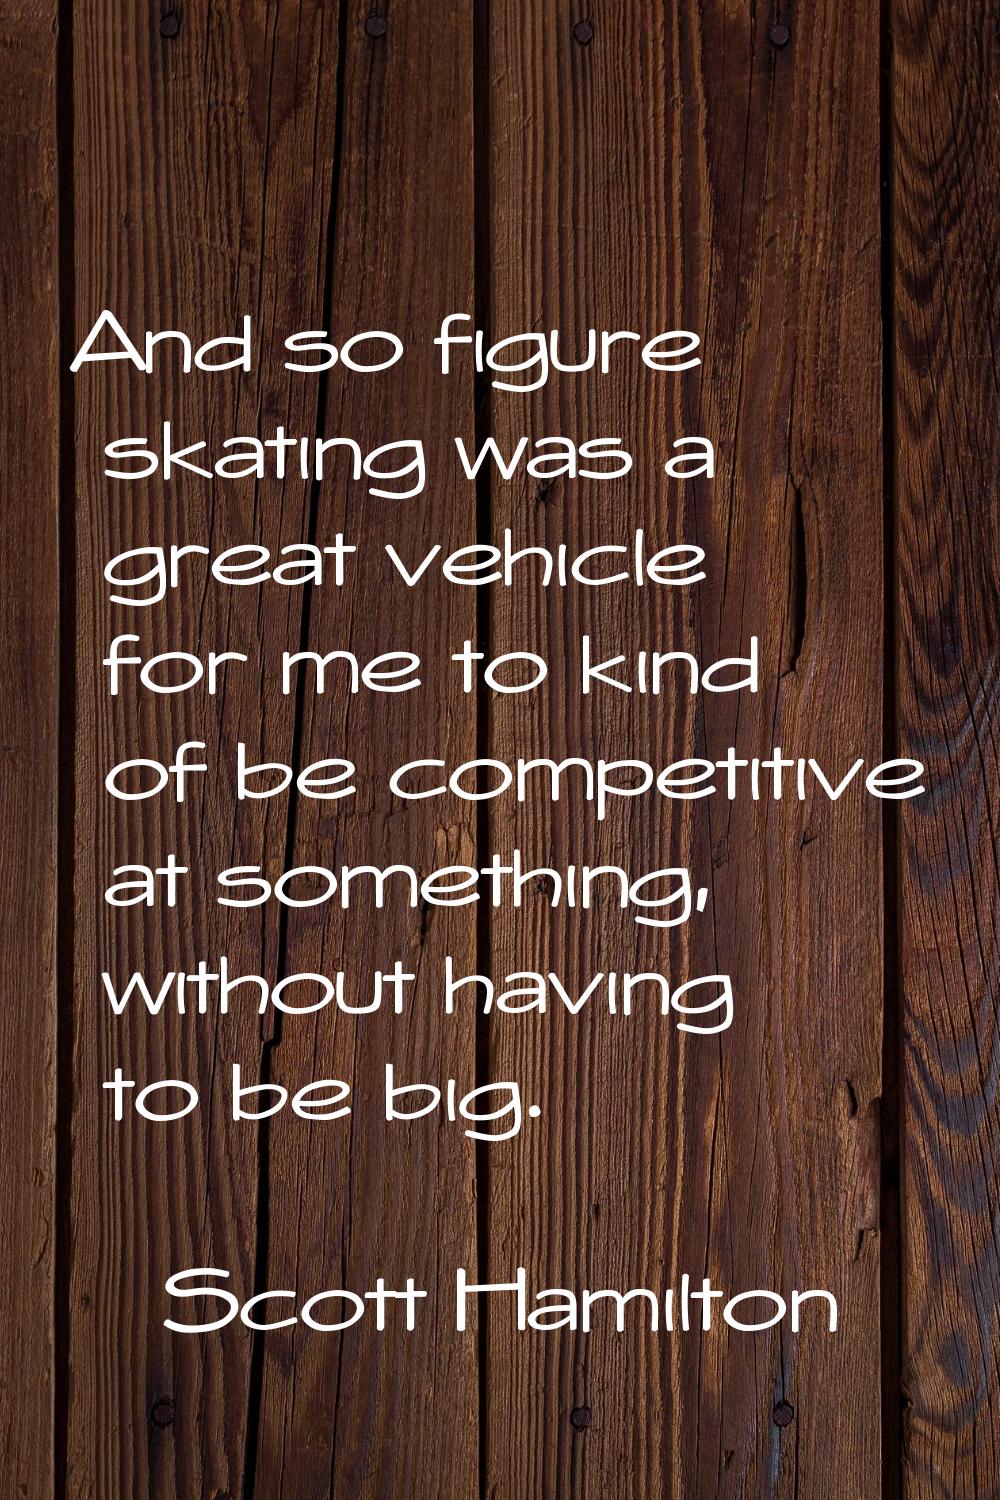 And so figure skating was a great vehicle for me to kind of be competitive at something, without ha